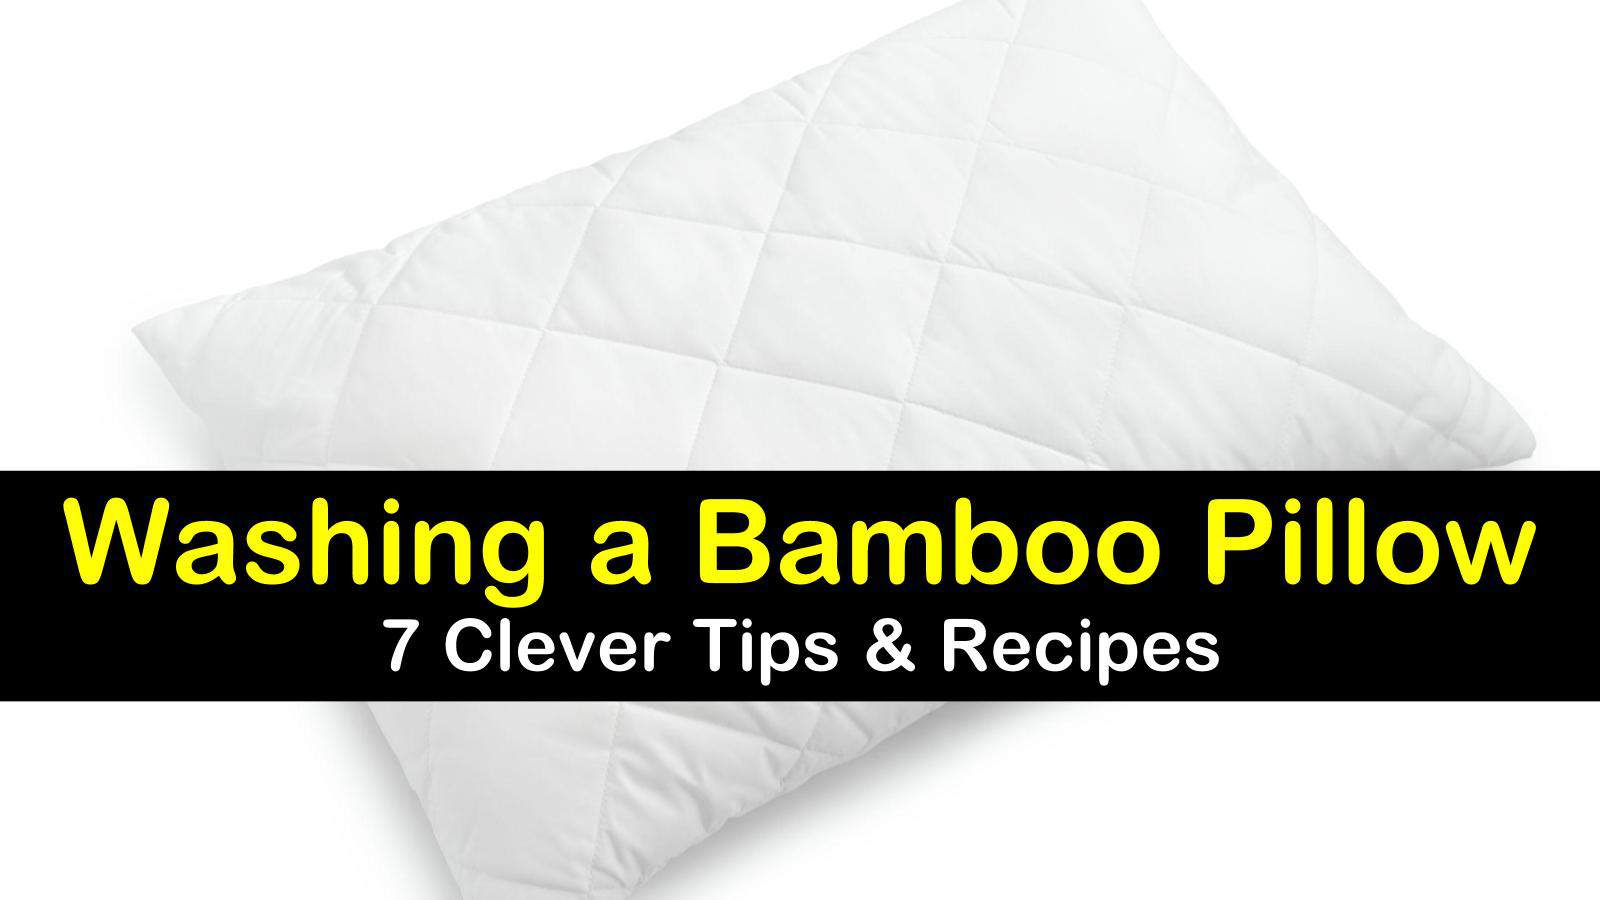 Can You Wash Bamboo Pillows In The Washing Machine Washing A Bamboo Pillow 7 Clever Tips Recipes